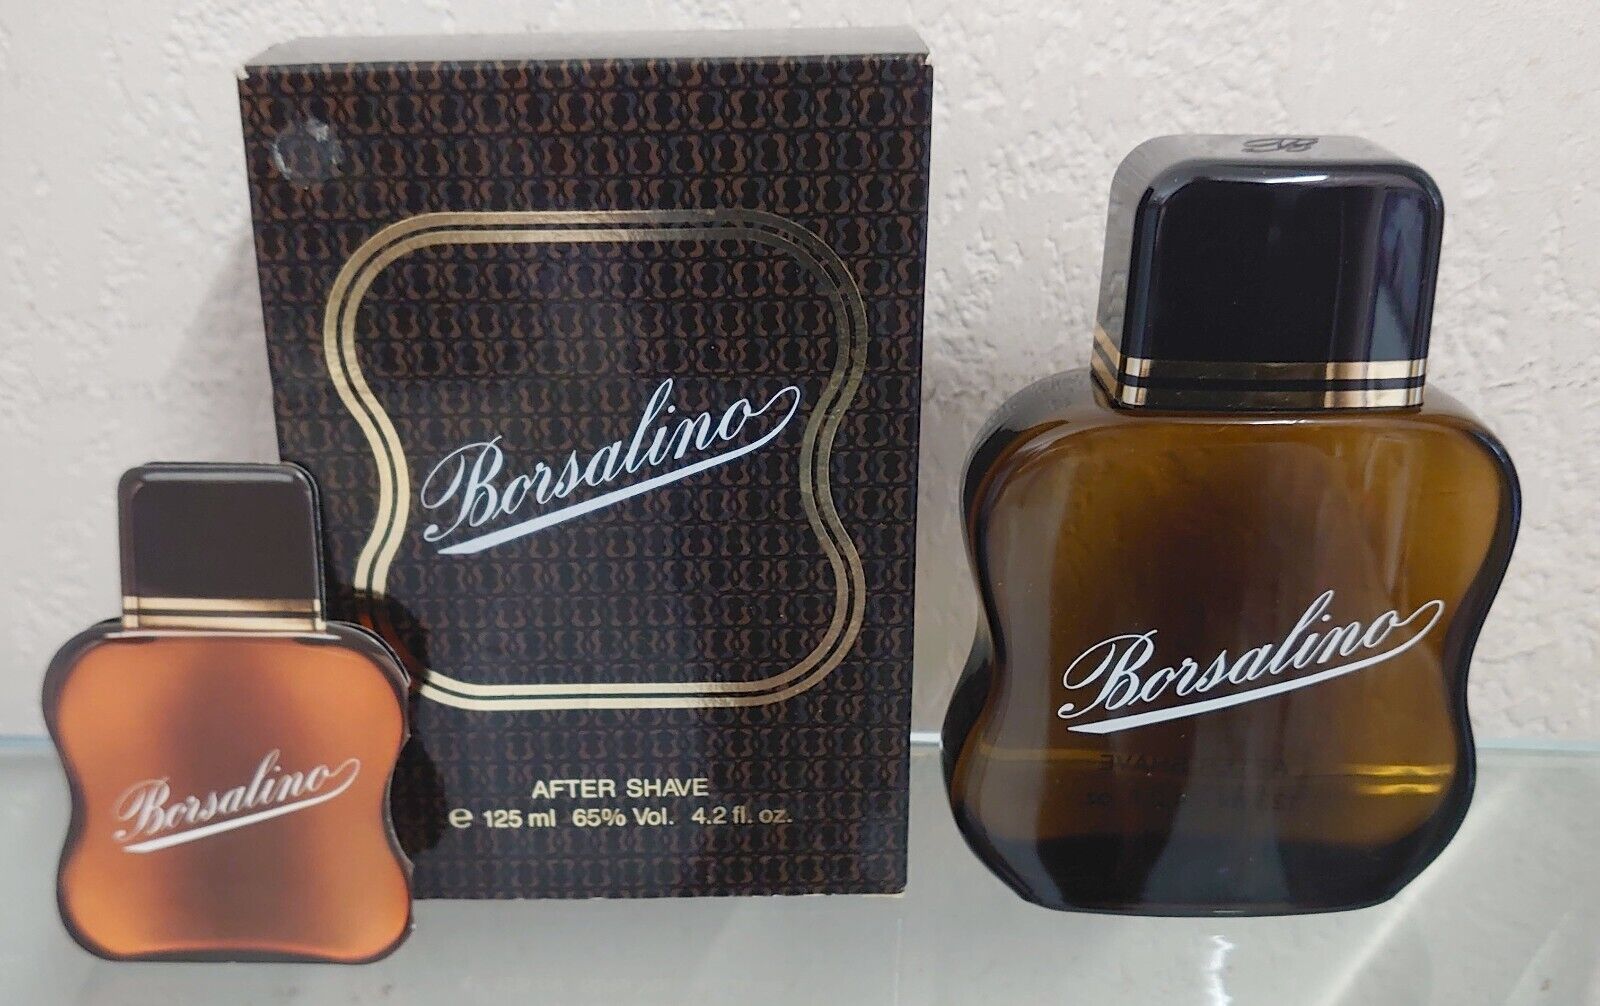 BAG - AFTER SHAVE 125 ML by BAG